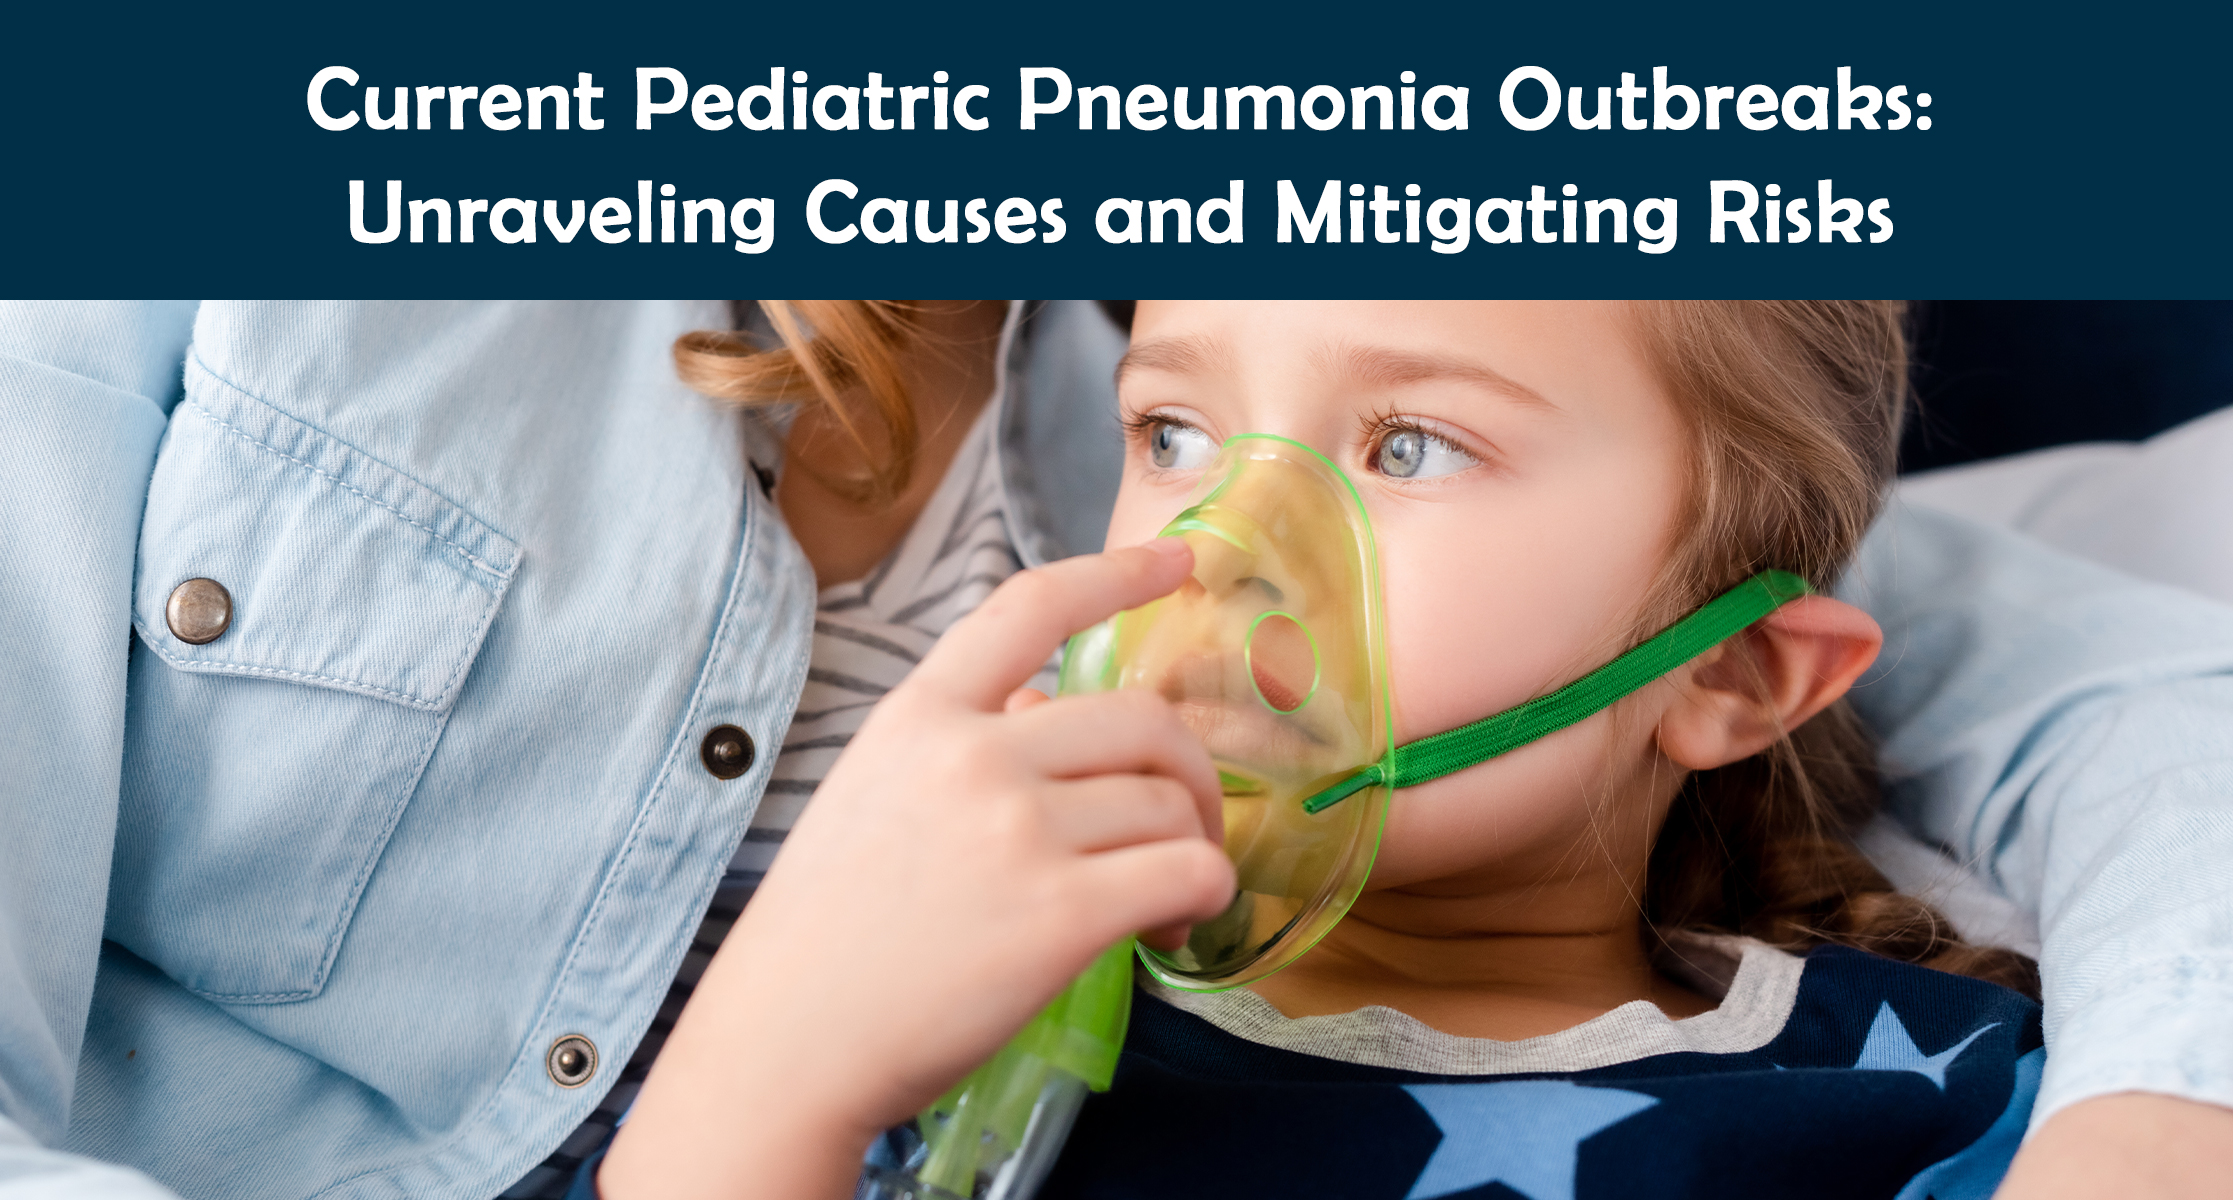 Current Pediatric Pneumonia Outbreaks: Unraveling Causes and Mitigating Risks